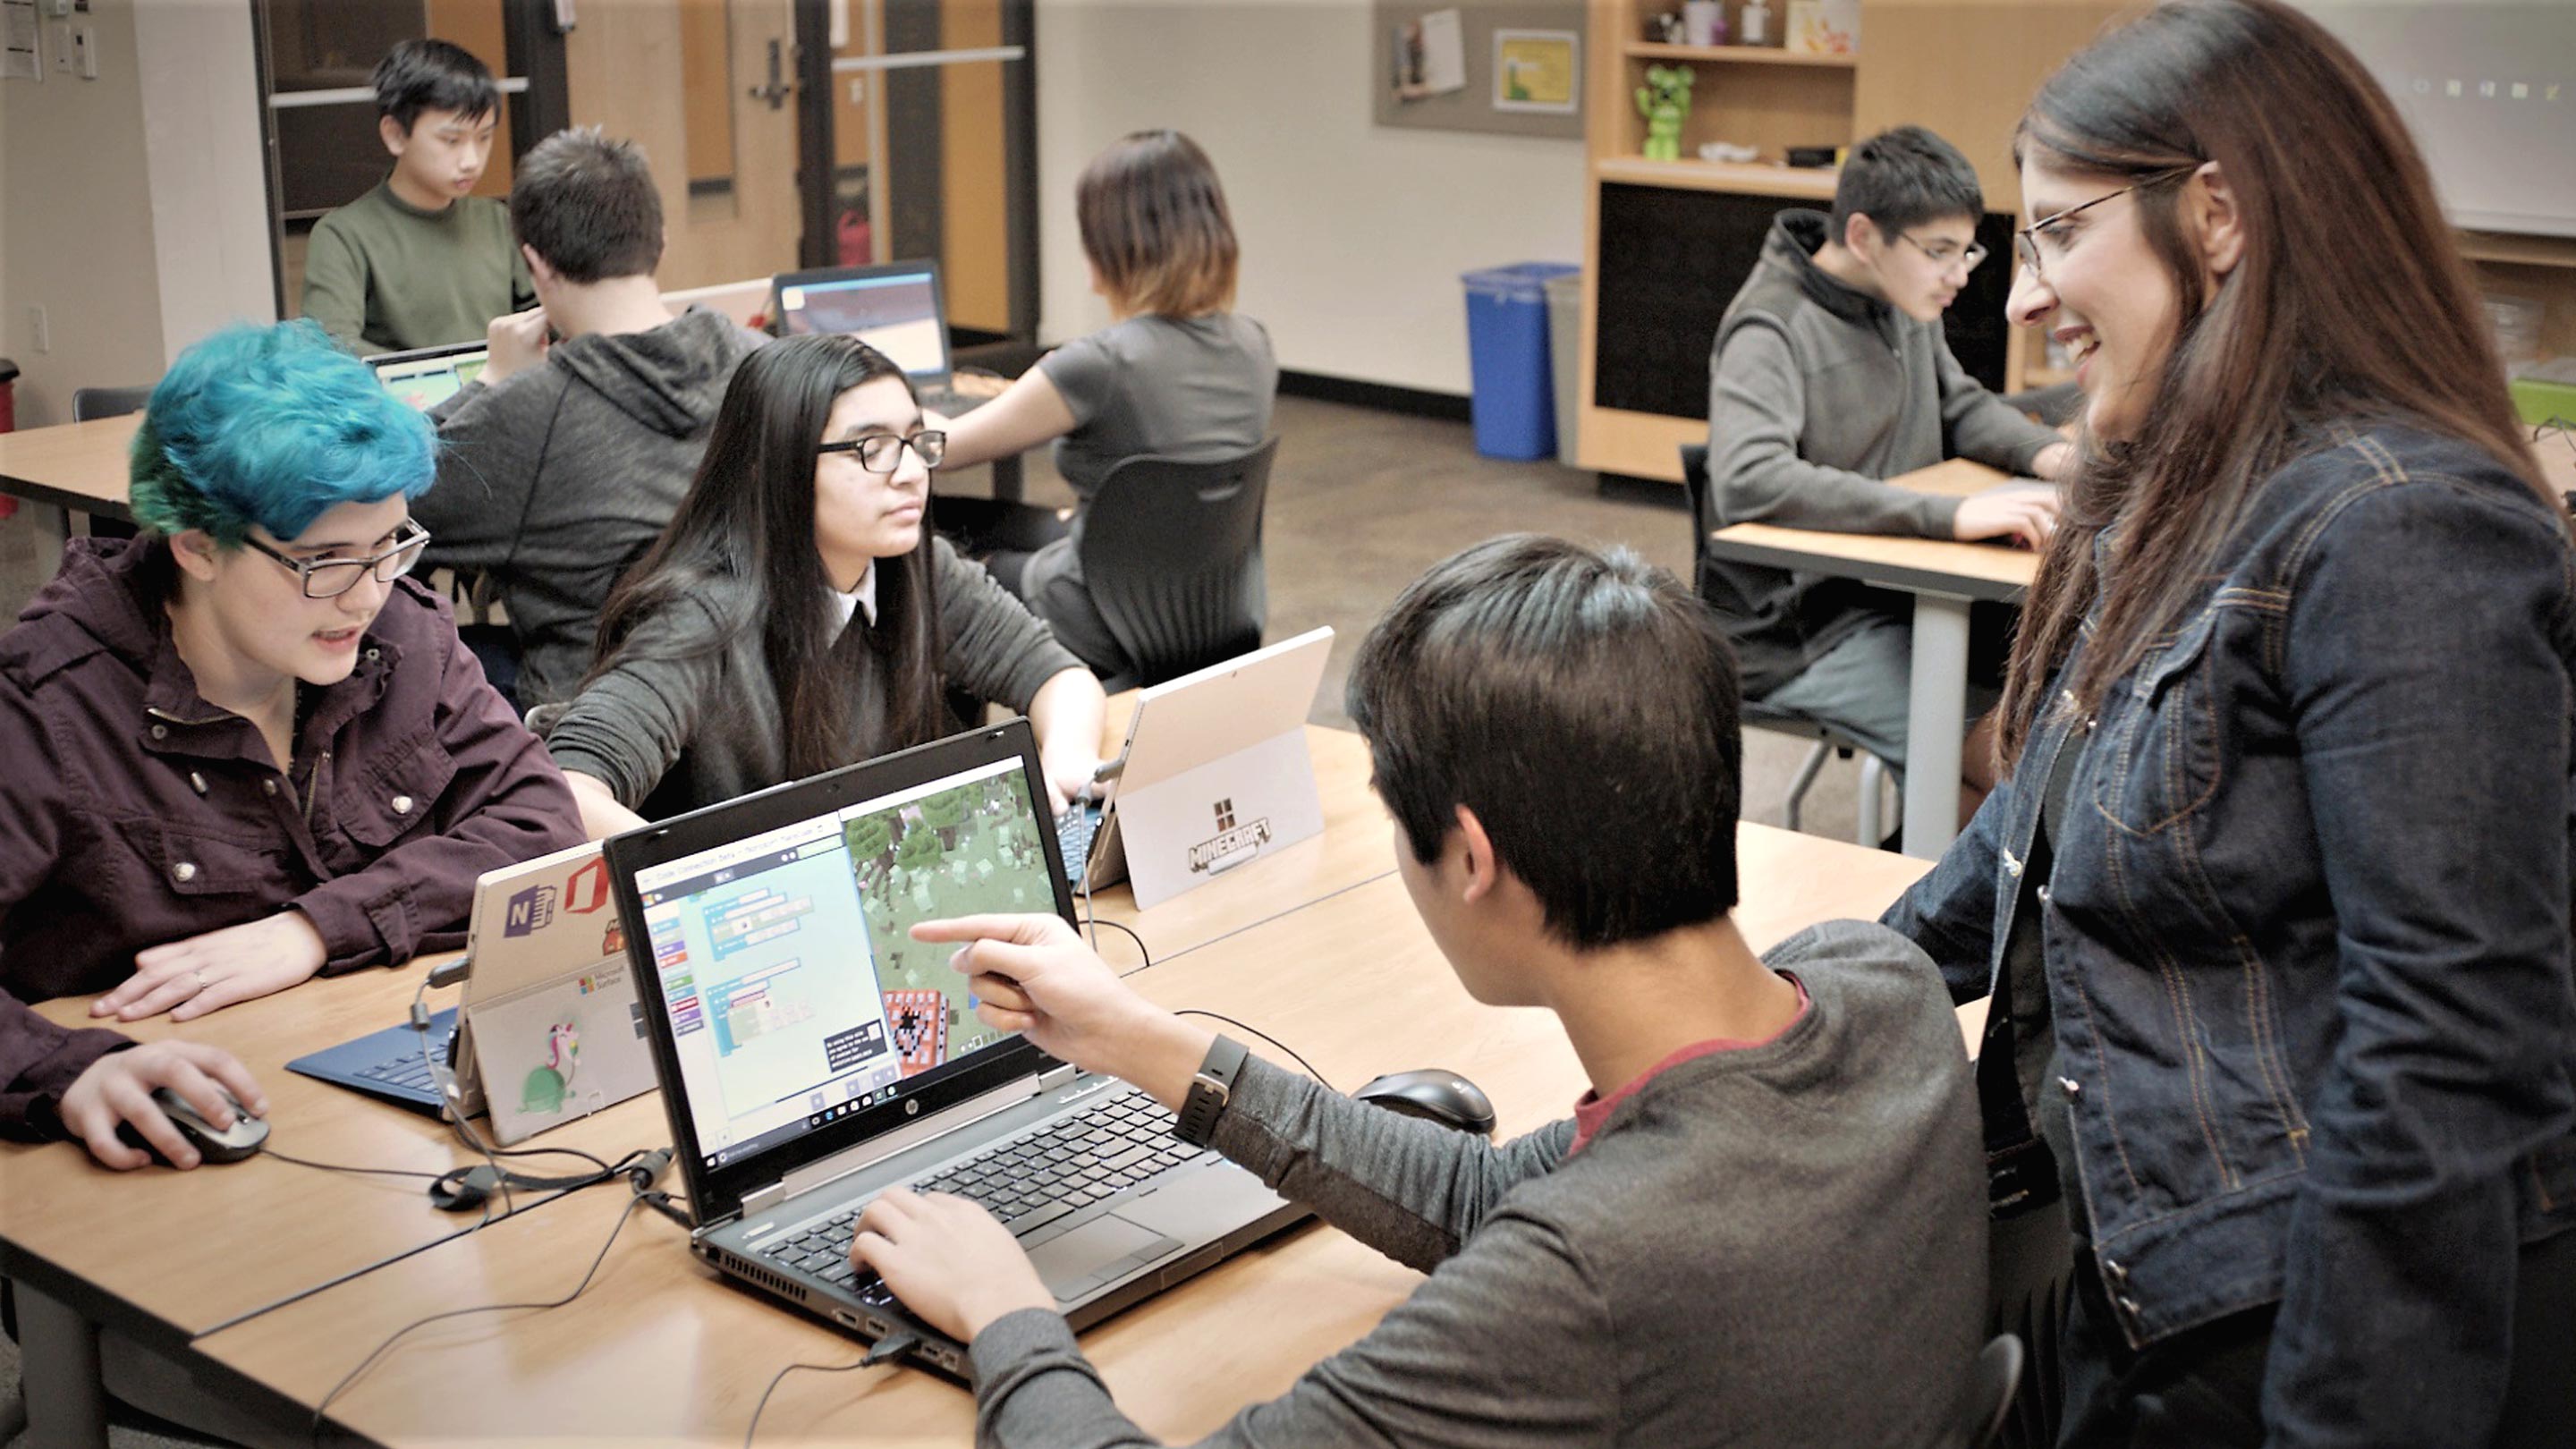 Digital Games Beat Out Lectures When It Comes to Student Learning